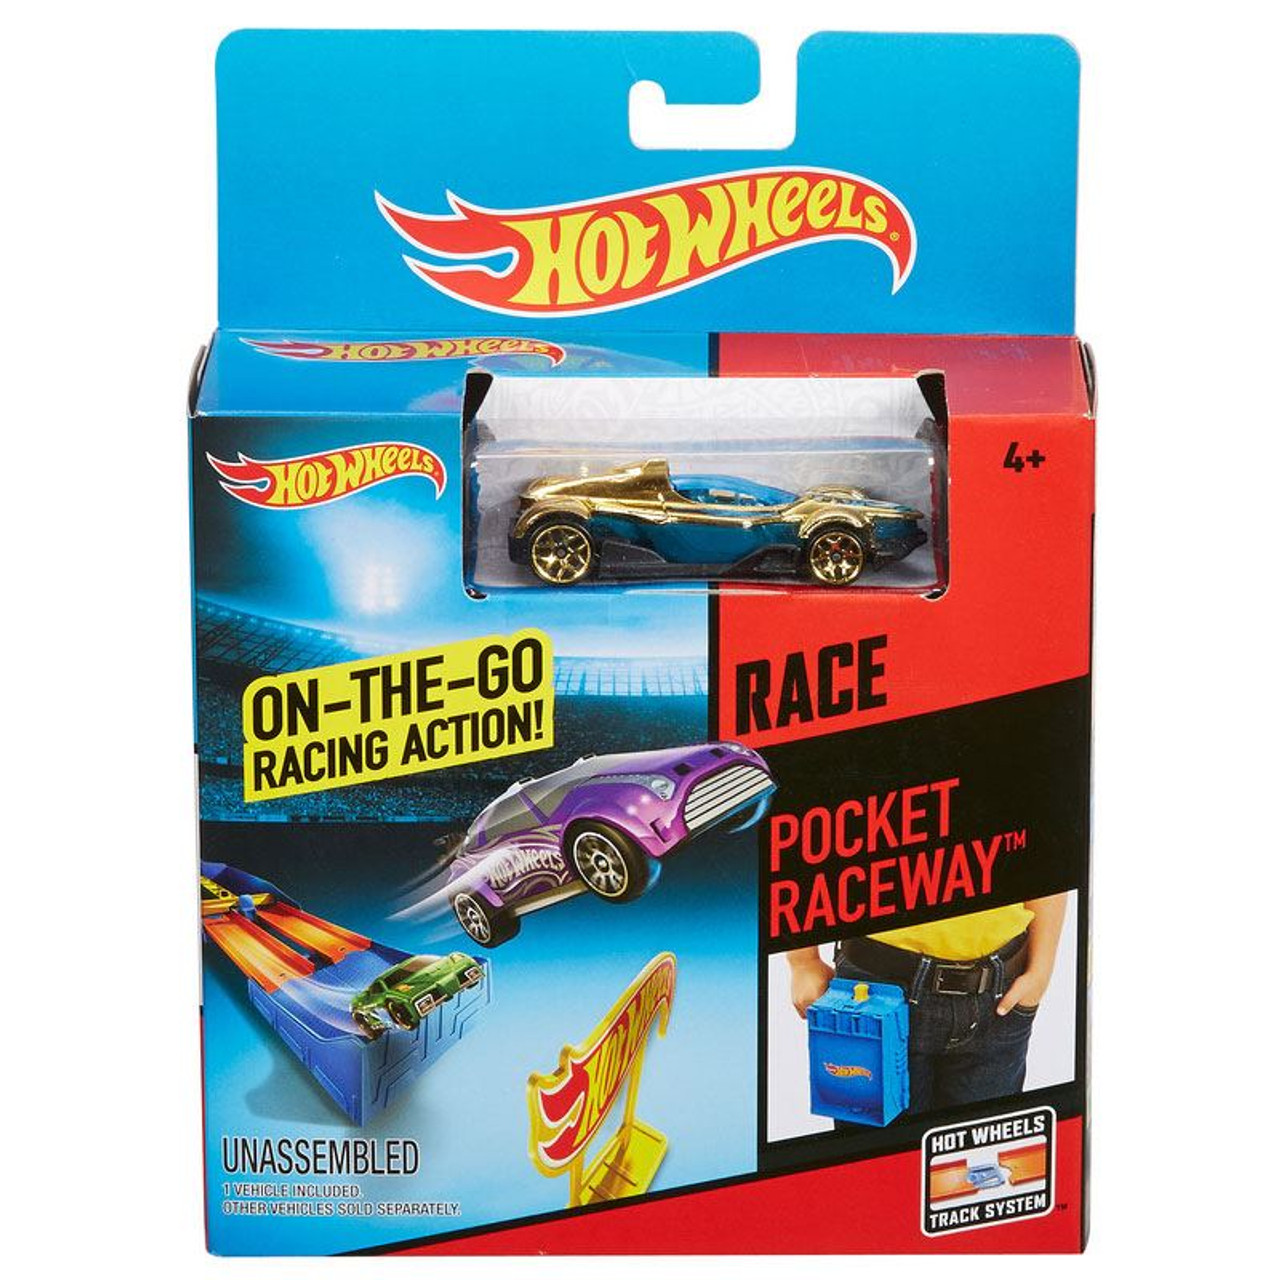 Hot Wheels POCKET RACEWAY Track Set with 1:64 Scale Die-Cast